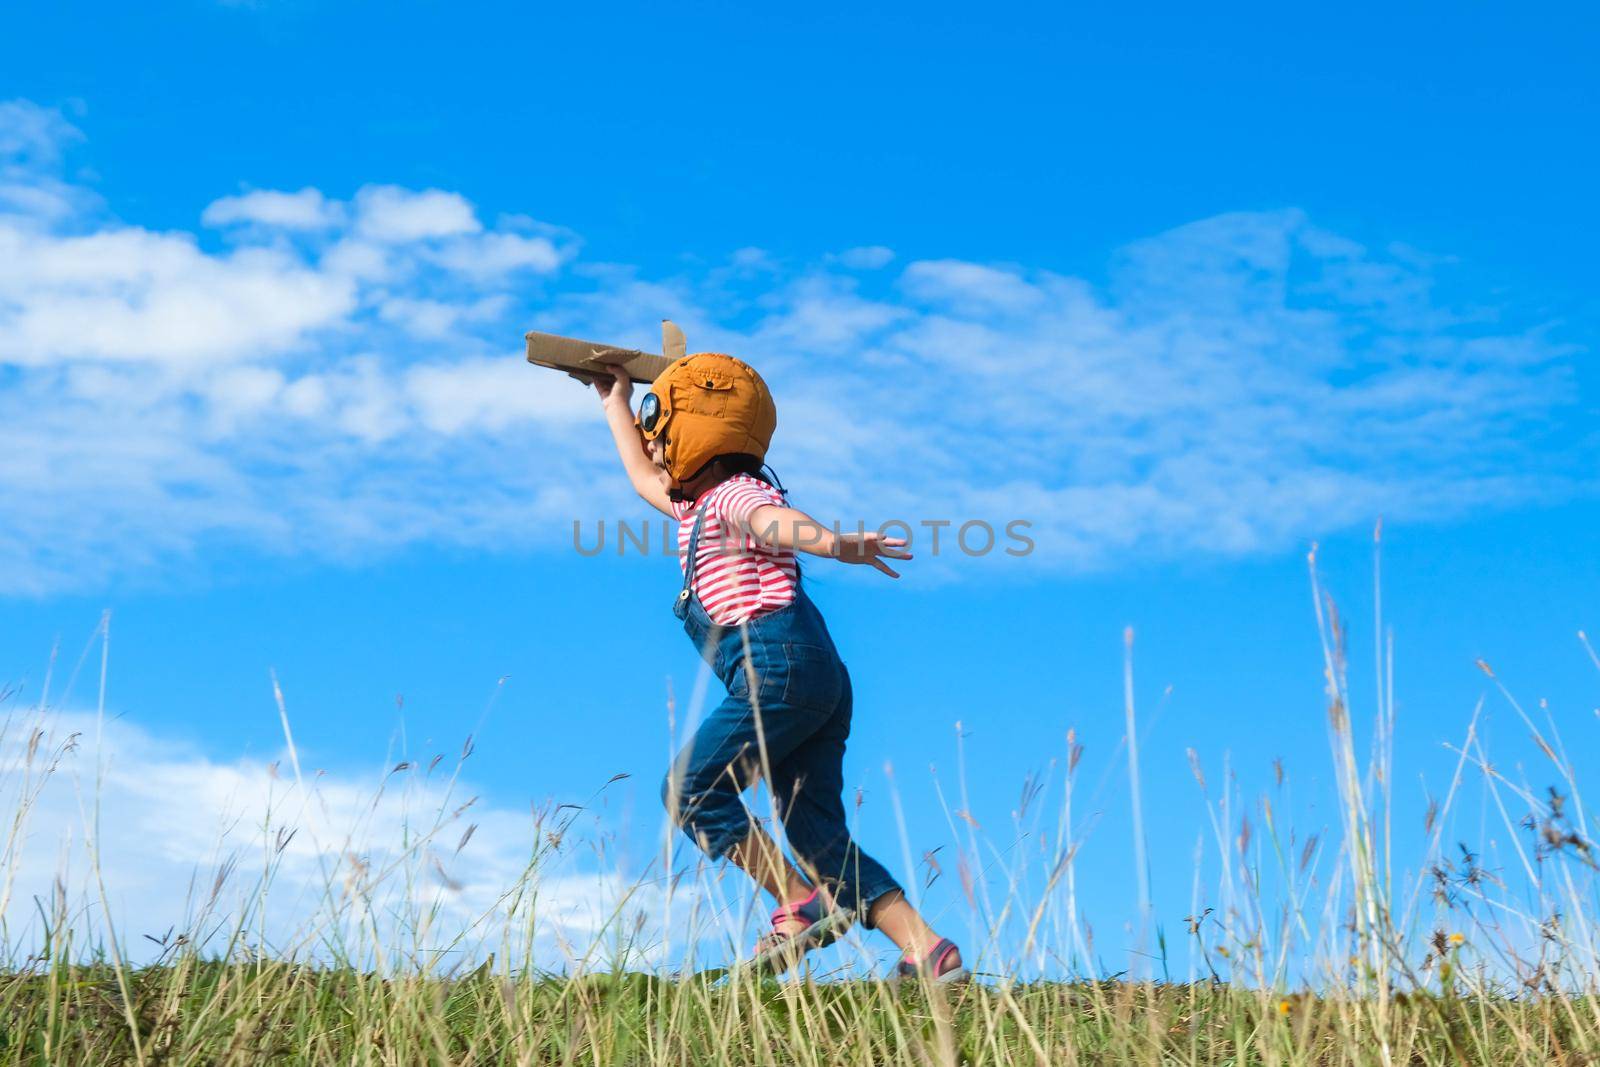 Cute little girl running through the meadow on a sunny day with a toy plane in hand. Happy kid playing with cardboard plane against blue summer sky background. Childhood dream imagination concept. by TEERASAK